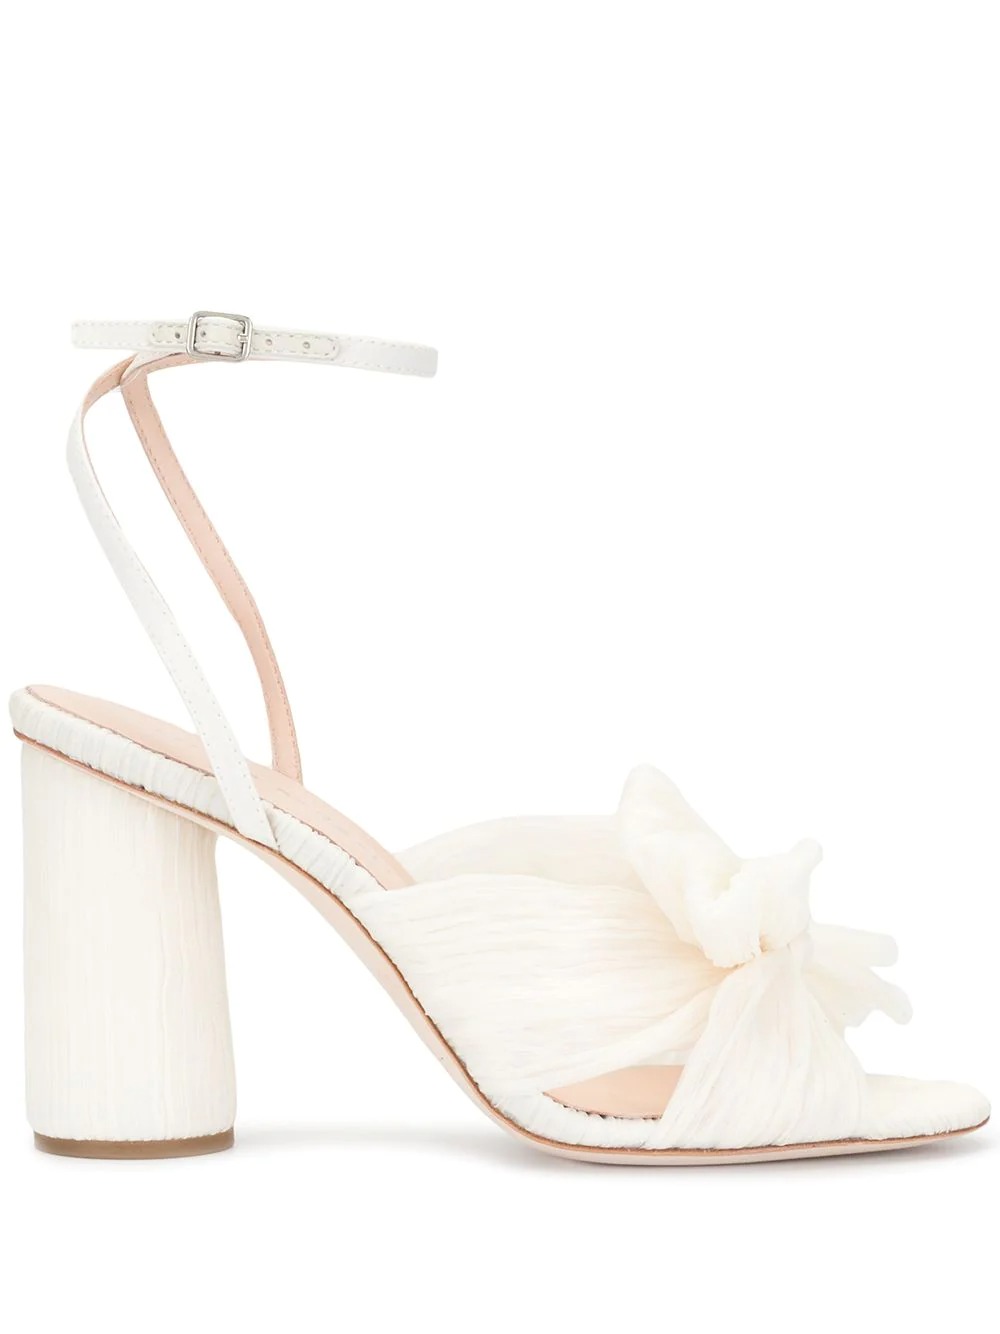 sandals with chunky heels for outdoor wedding